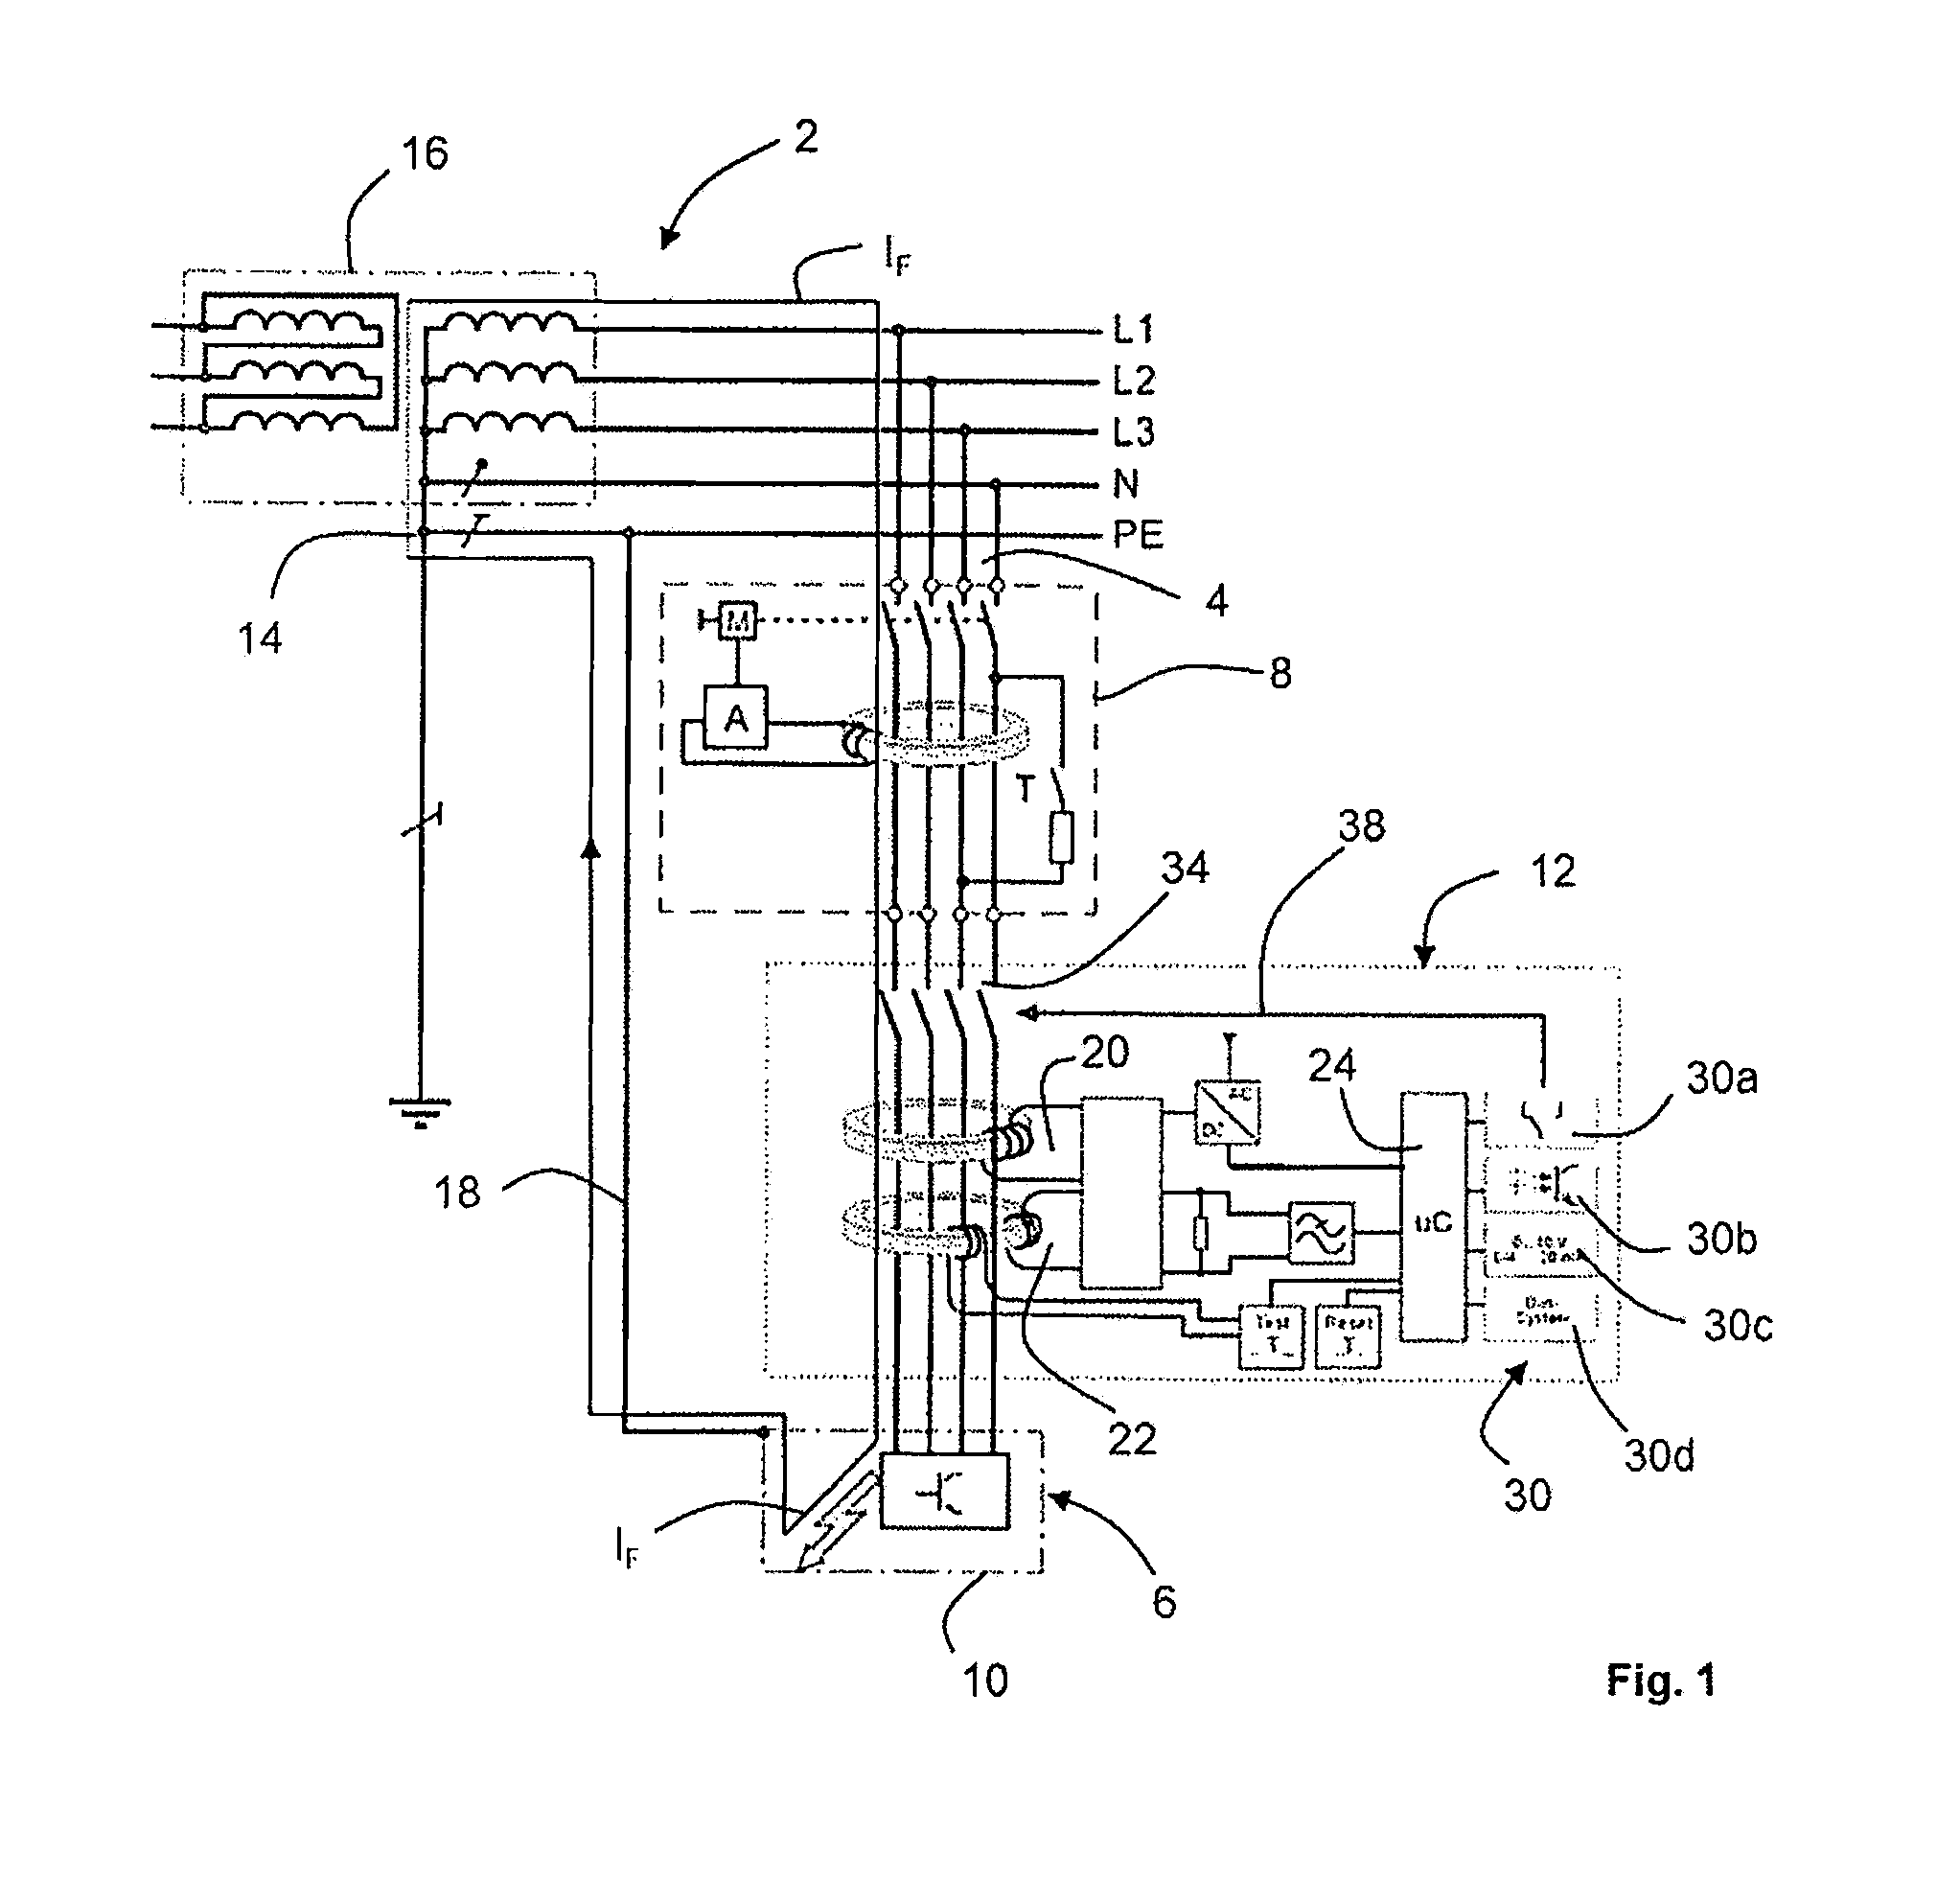 Electrical monitoring device and method for safeguarding the protective function of a type a residual current device (RCD)